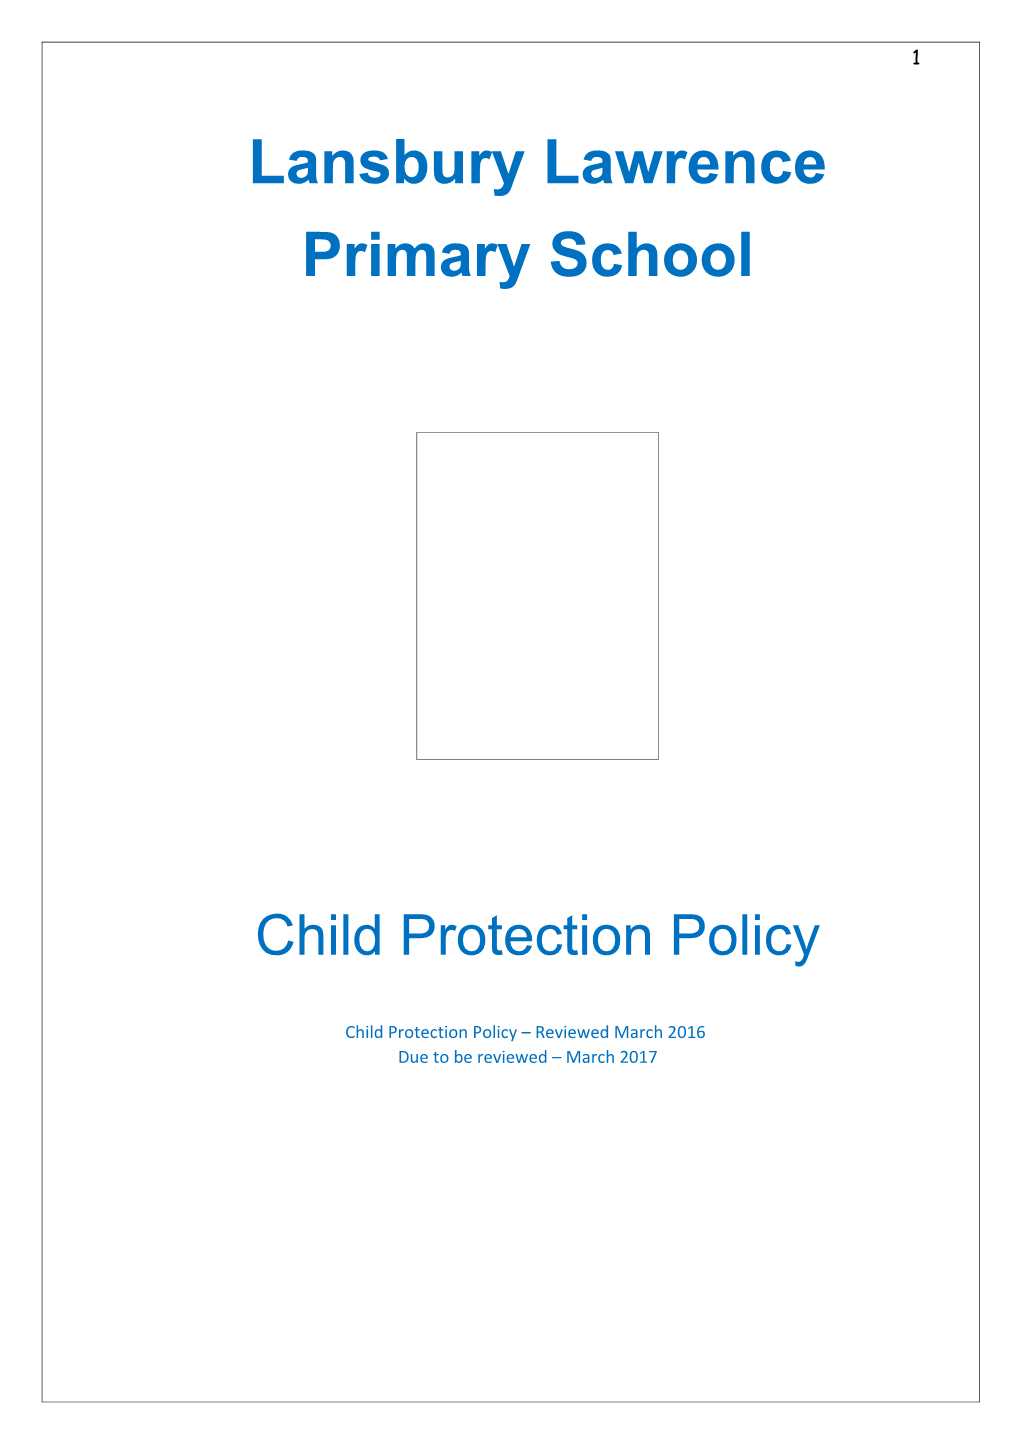 Policy Child Protection